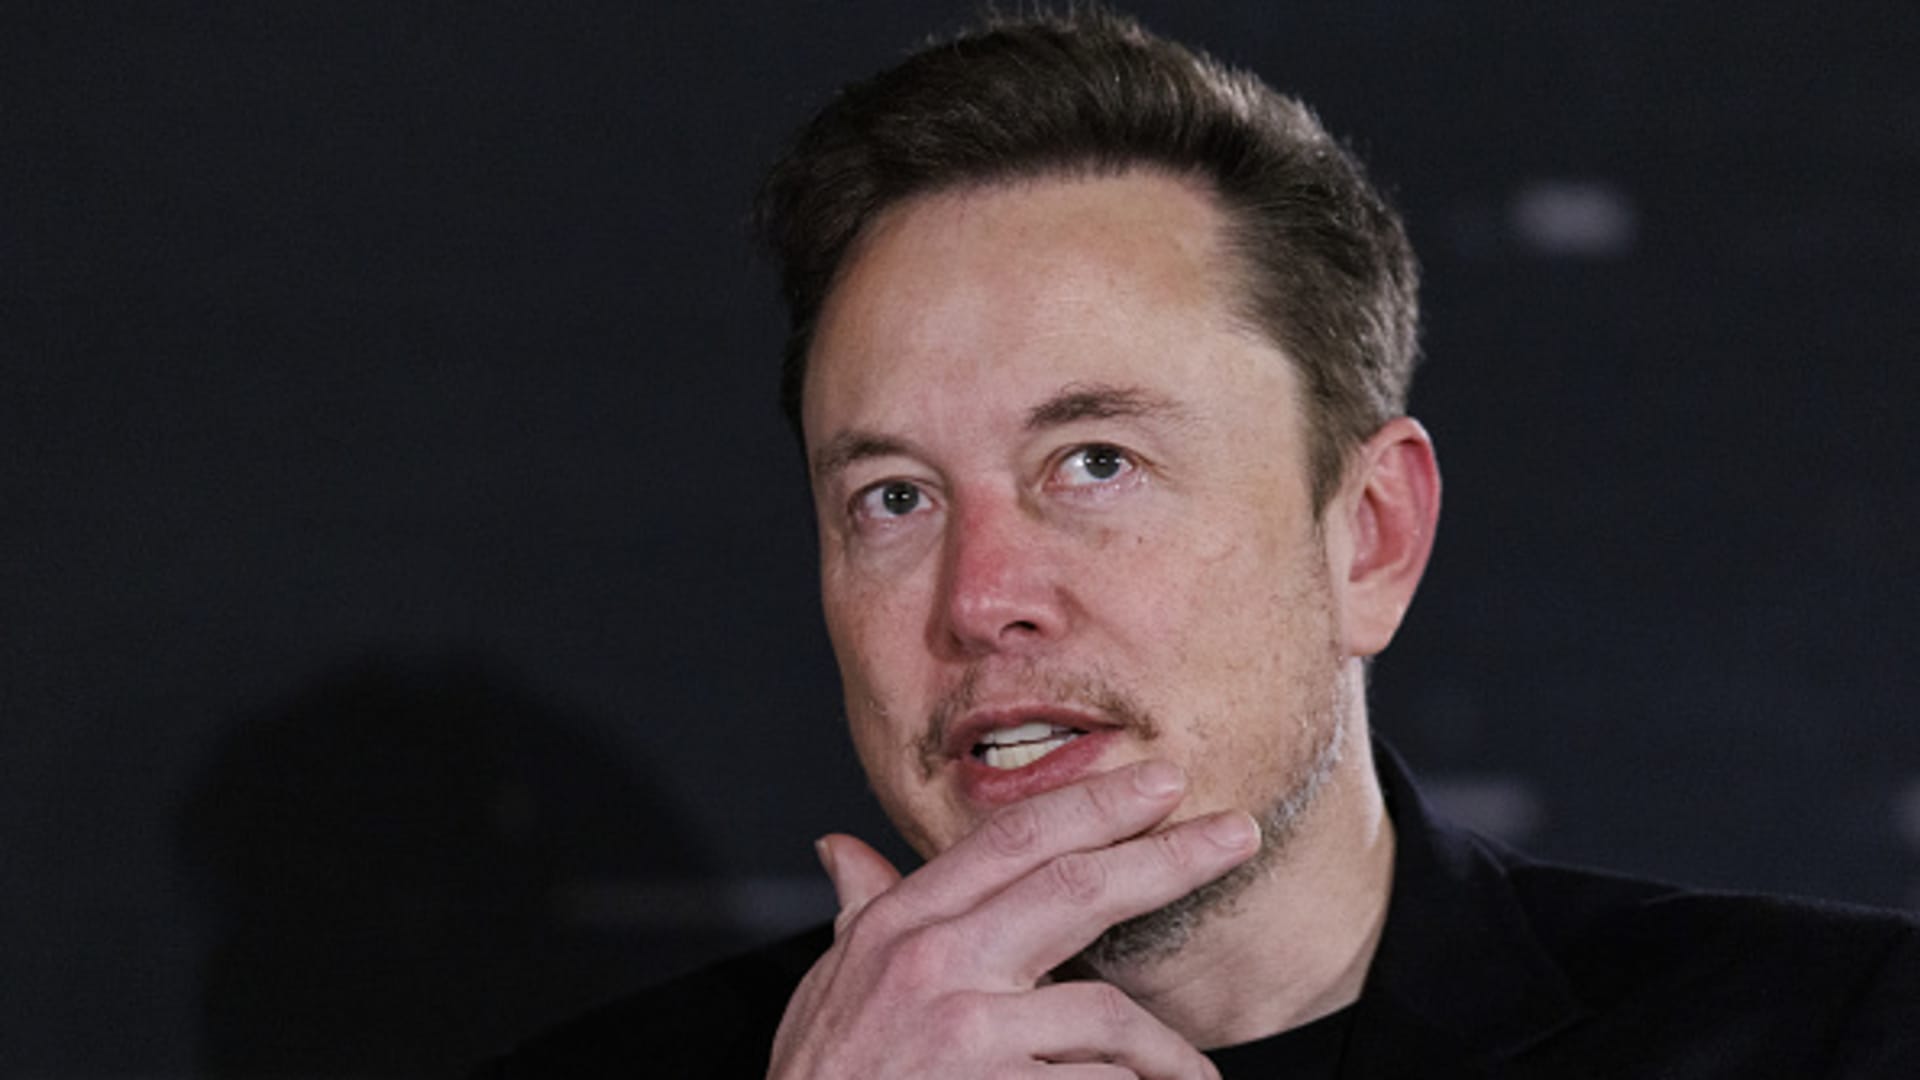 The White House criticizes Elon Musk for promoting anti-Semitic and racist “hate”.